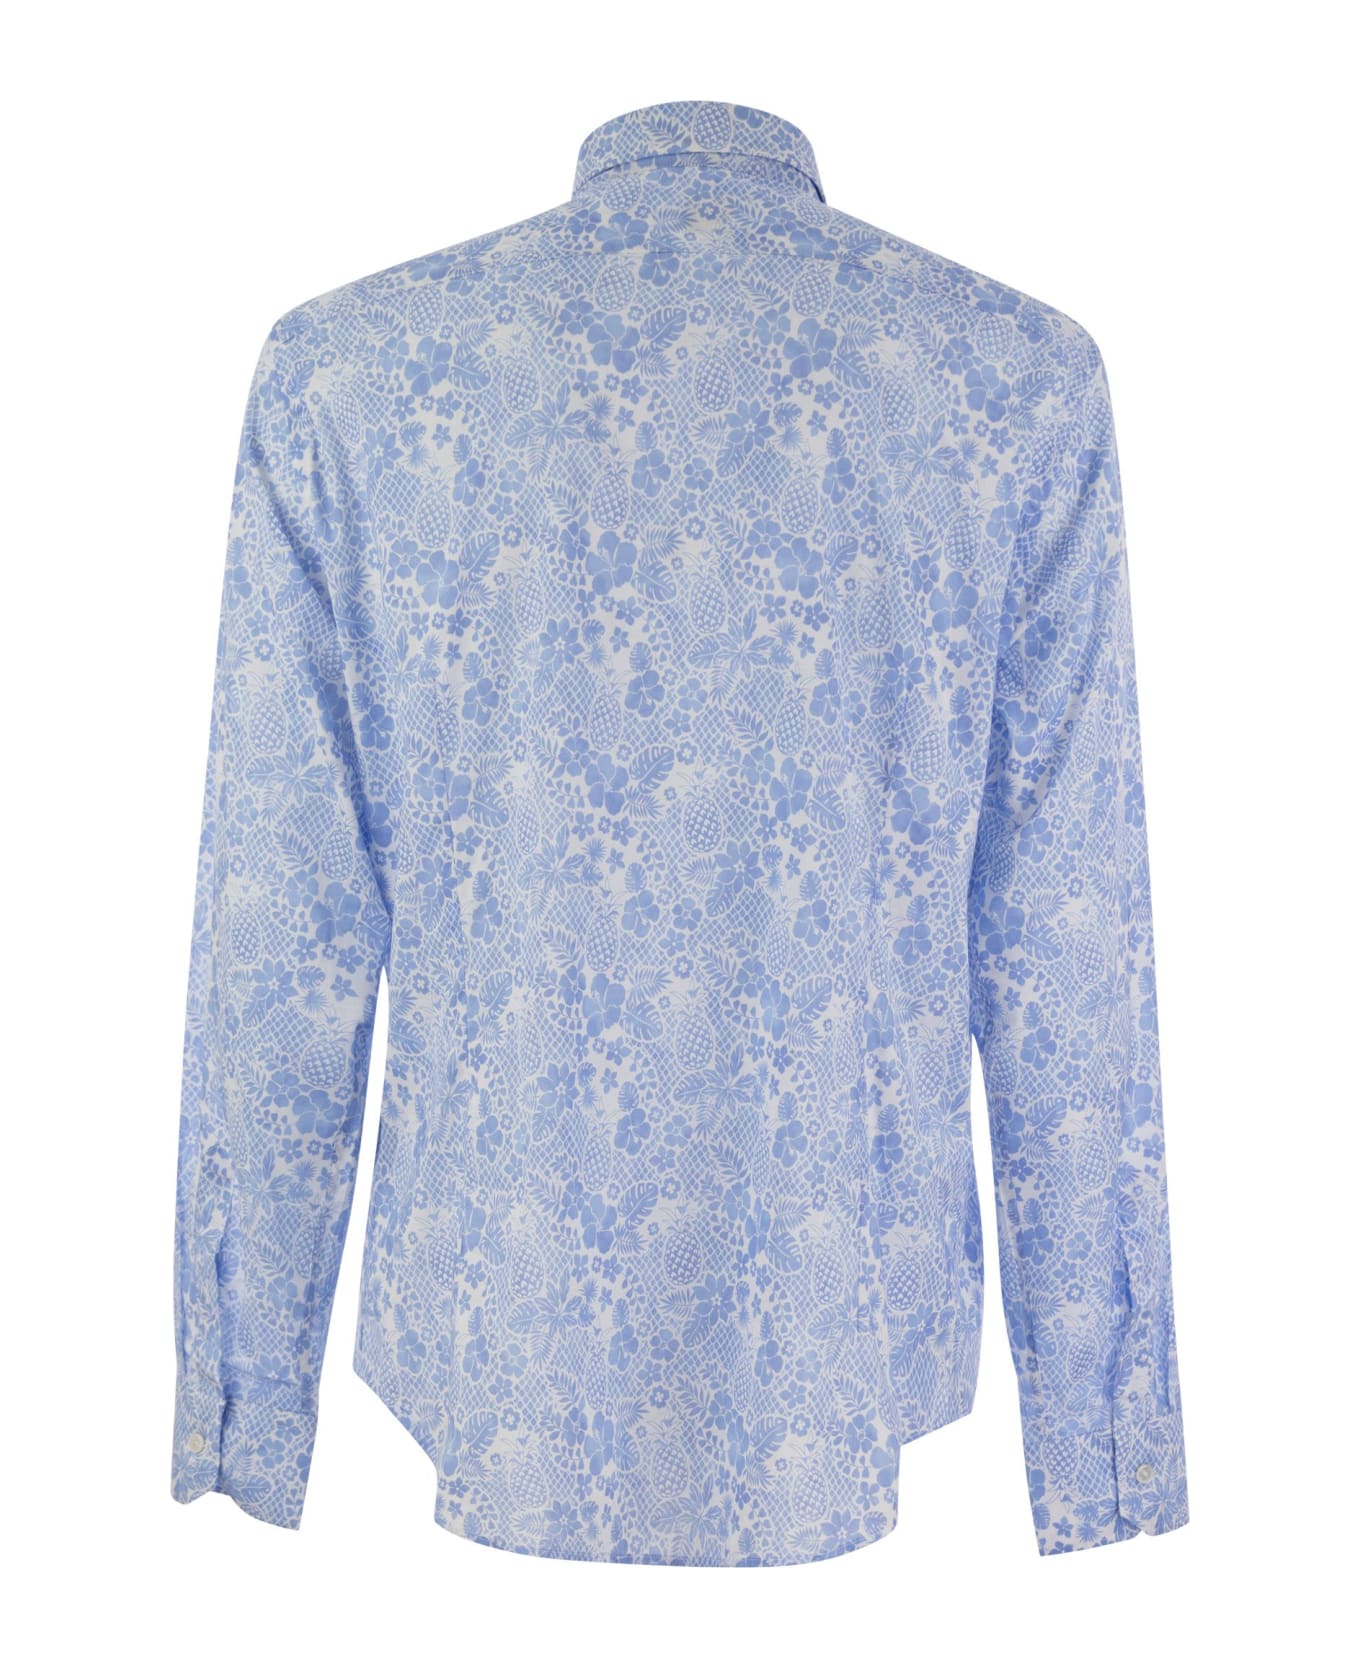 Fedeli Printed Stretch Cotton Voile Shirt - Light Blue